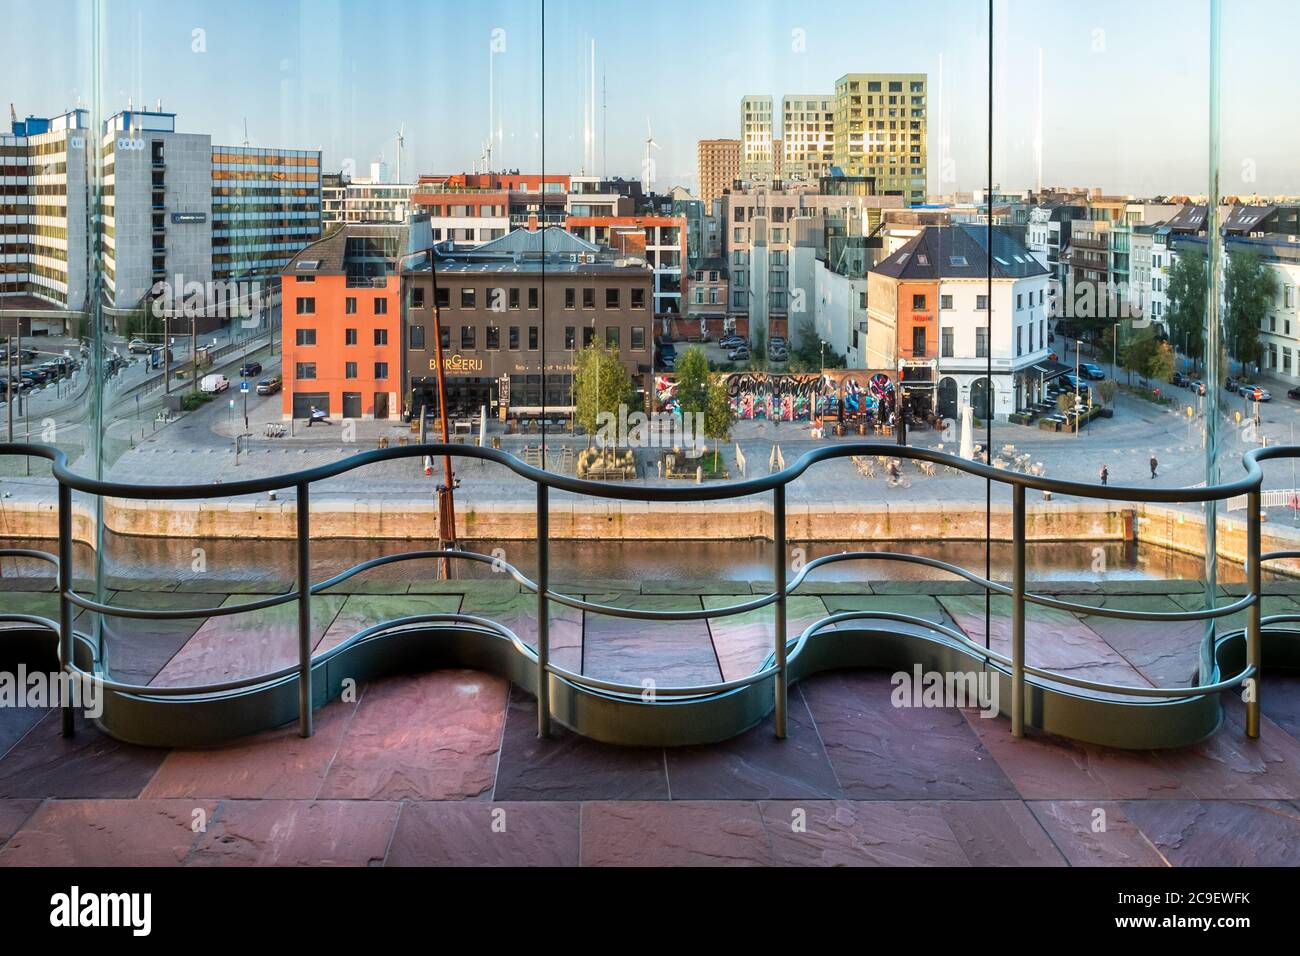 View through the curved windows of the modern MAS museum on the surrounding cafes and restaurants Stock Photo